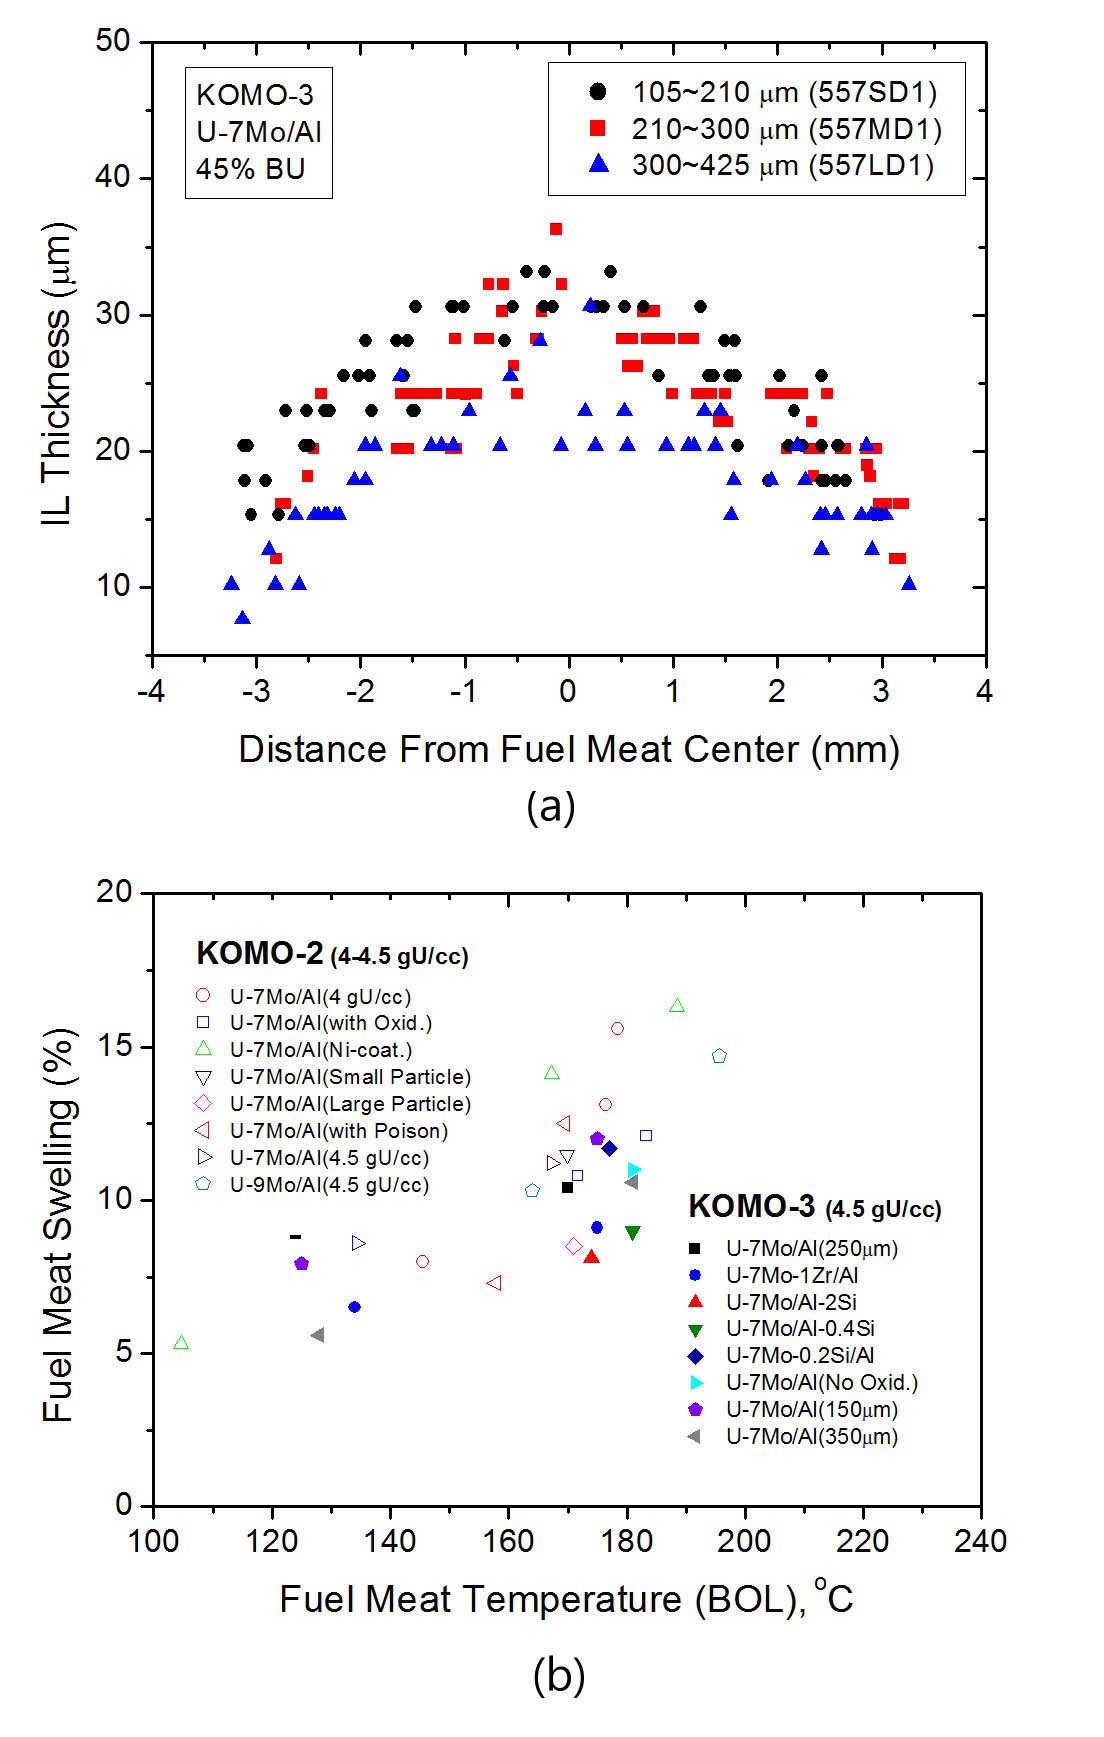 (a) Radial Distribution of the IL Thicknesses of the
Irradiated U-Mo/Al Dispersion Fuels using Different-size U-Mo
Particles. (b) The Variation of Fuel Swelling with Fuel
Meat Temperatures[32].